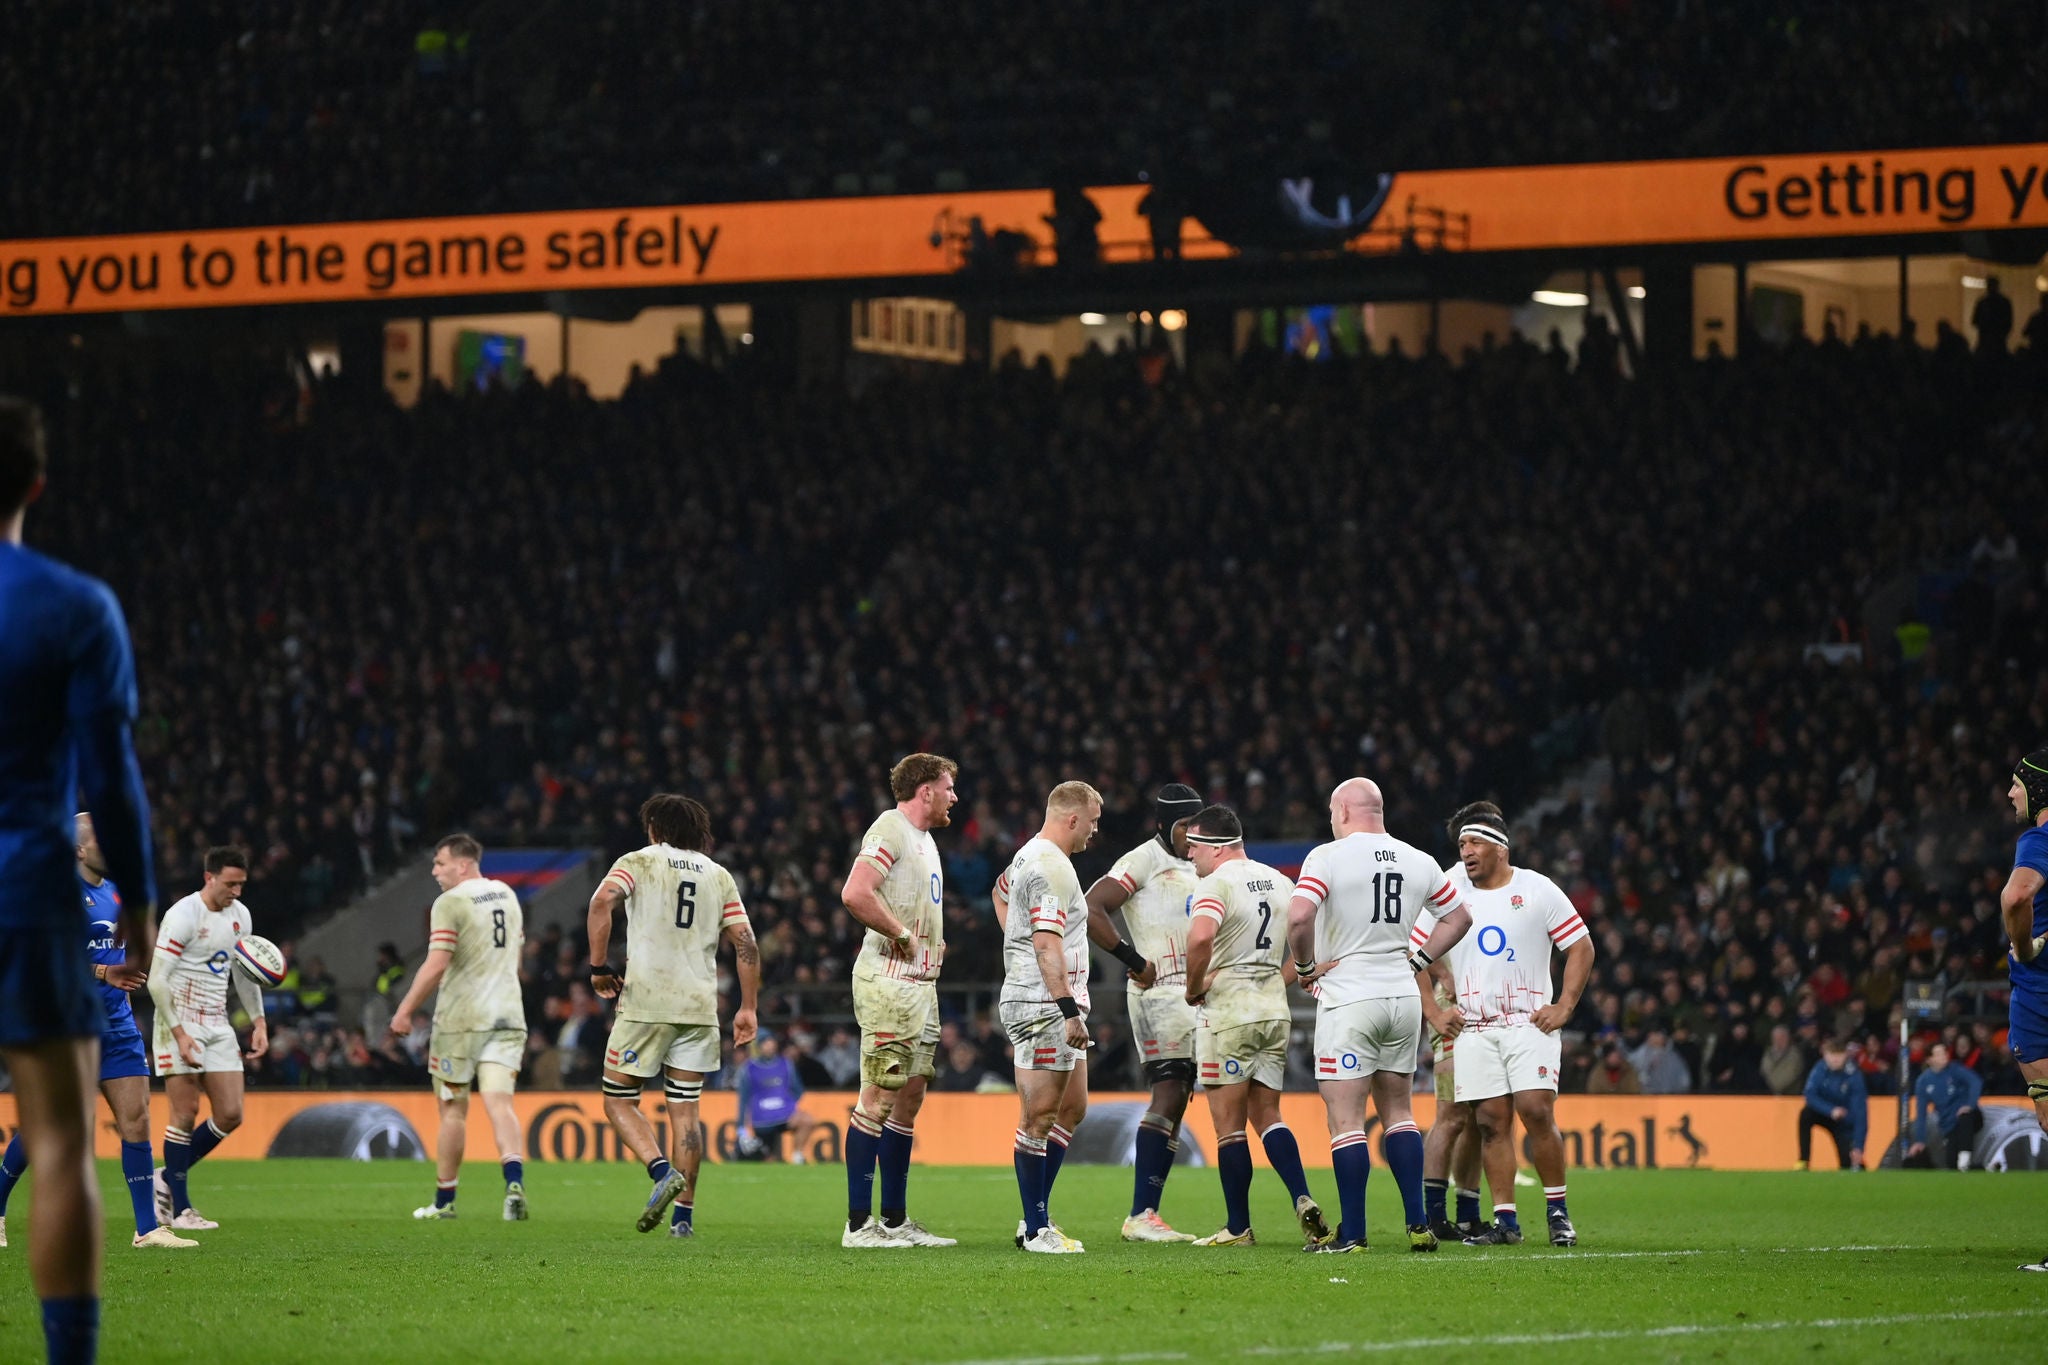 LONDON, ENGLAND - MARCH 11: Continental  during the Six Nations Rugby match between England and France at Twickenham Stadium on March 11, 2023 in London, England. (Photo by Dan Mullan - RFU/The RFU Collection via Getty Images)